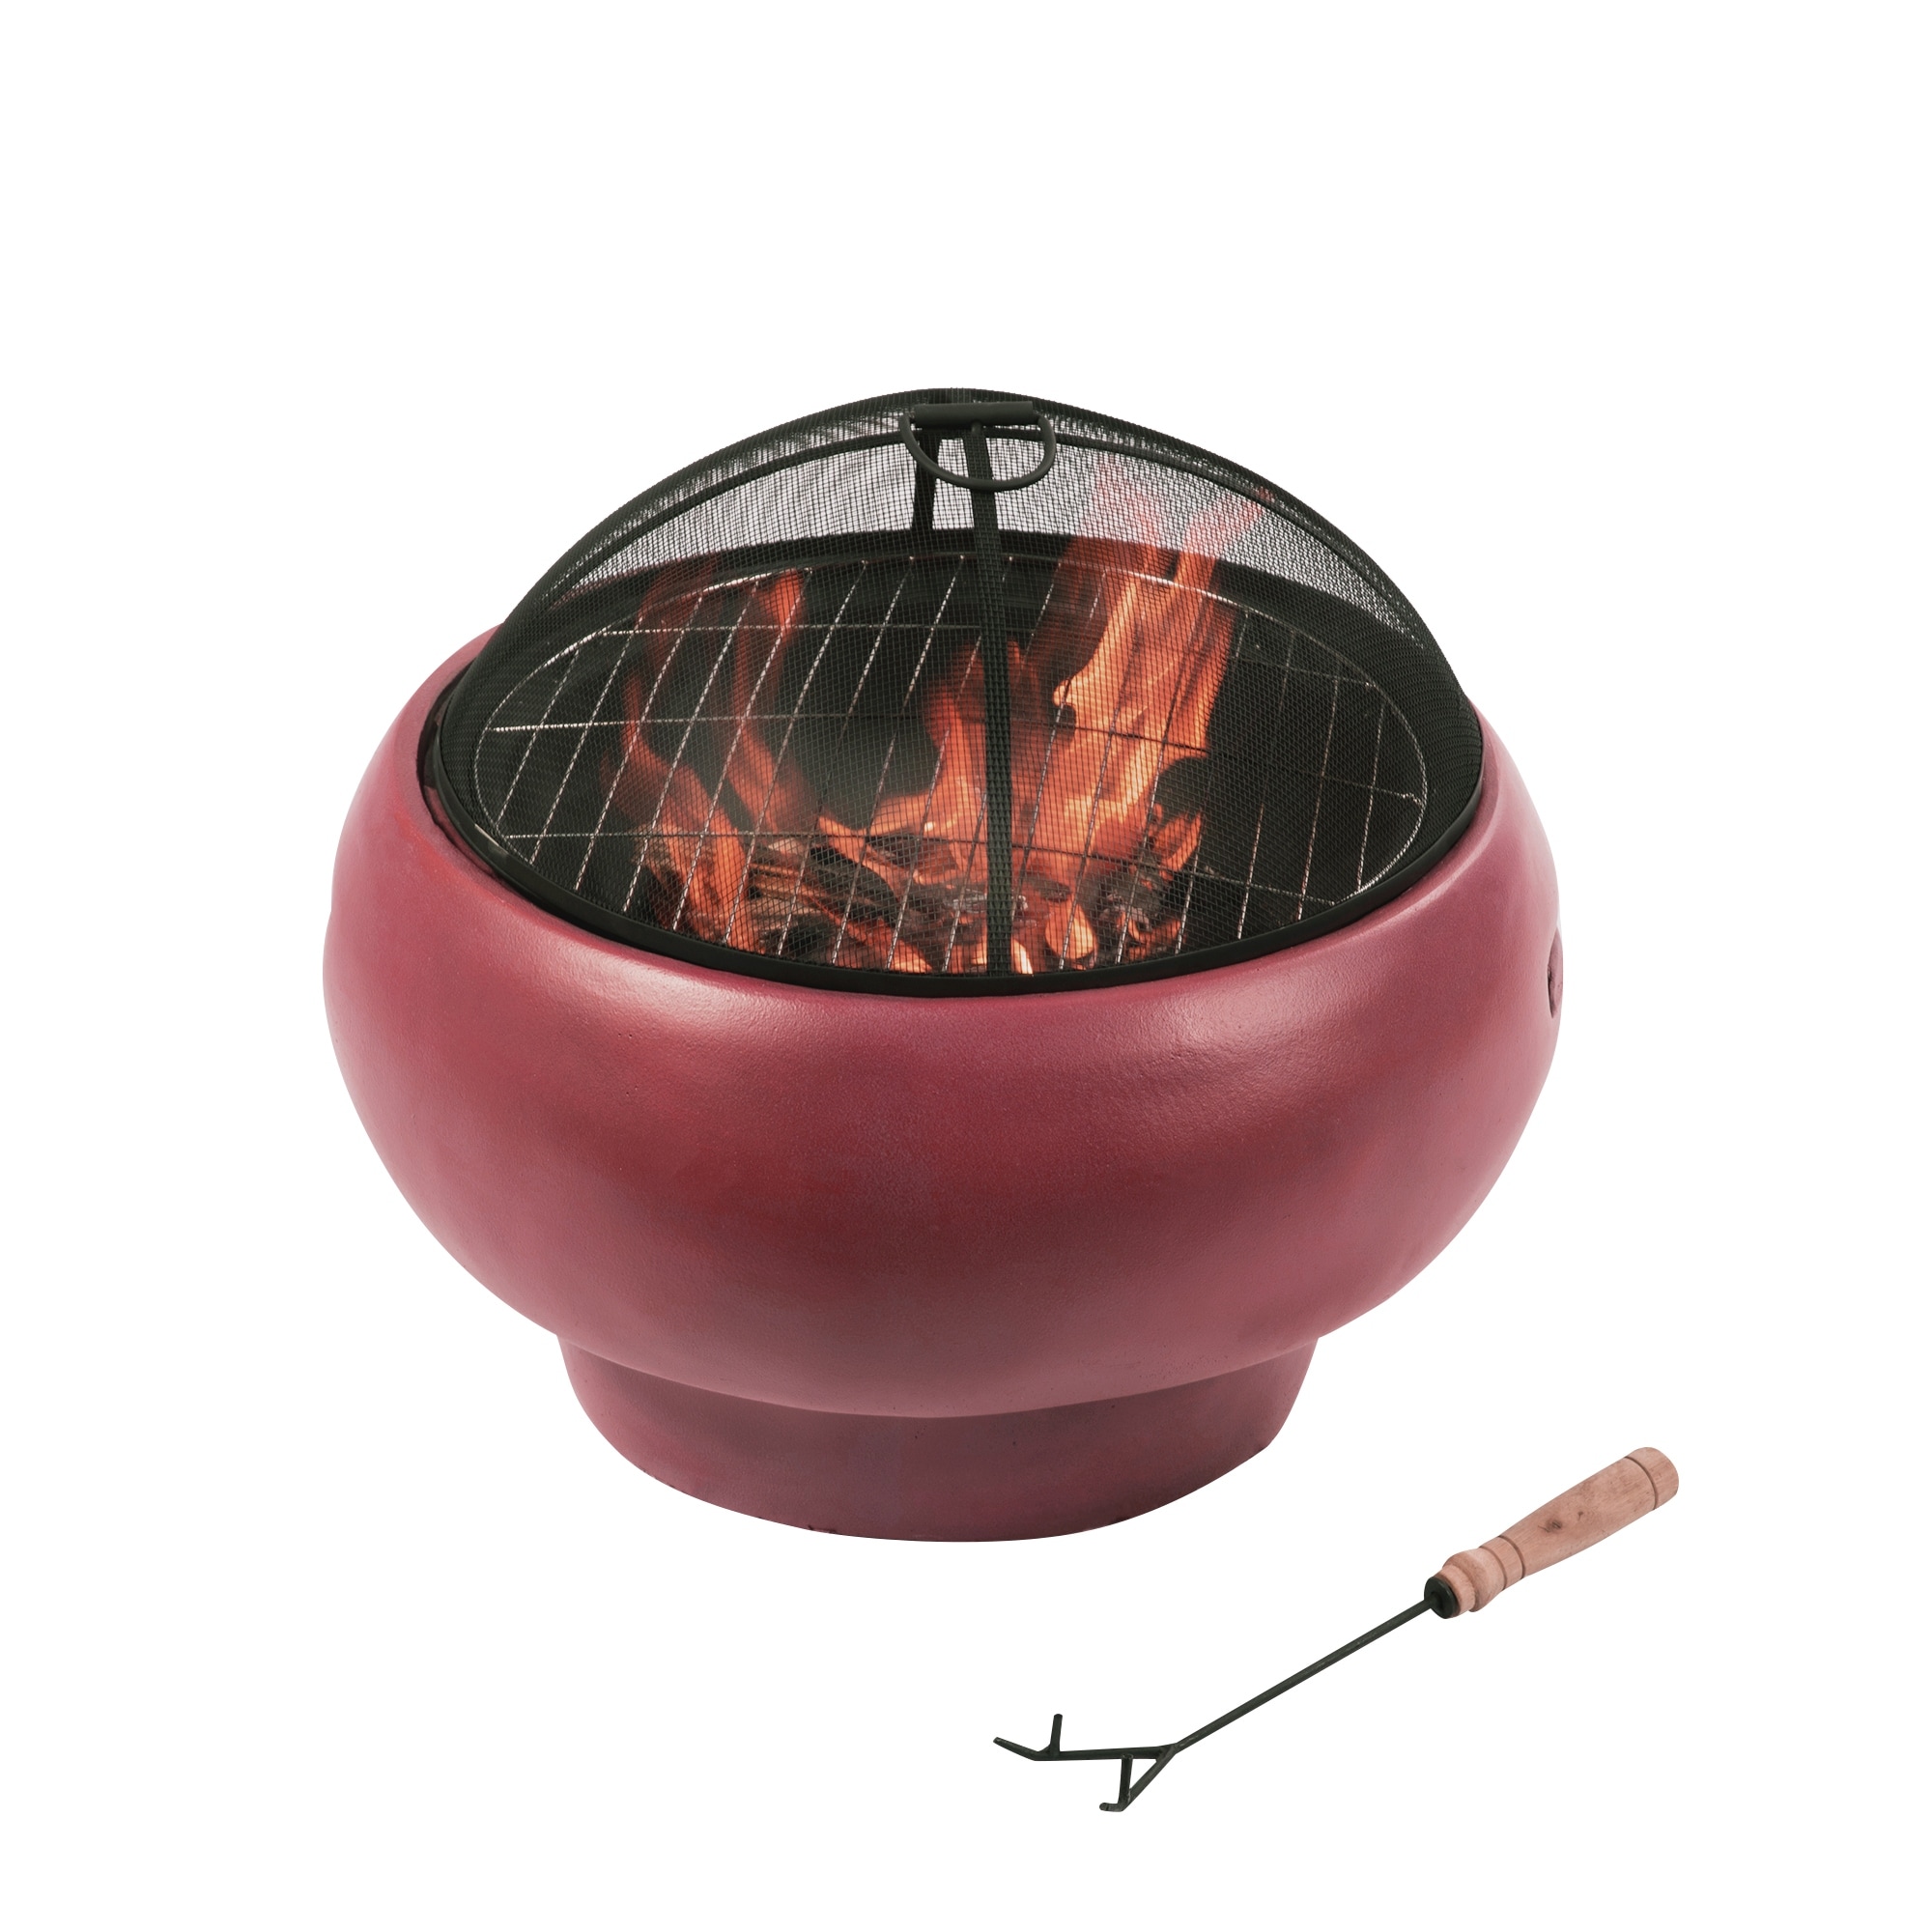 Teamson Home 21 inch Outdoor Round Concrete Wood Burning Fire Pit with Steel Base